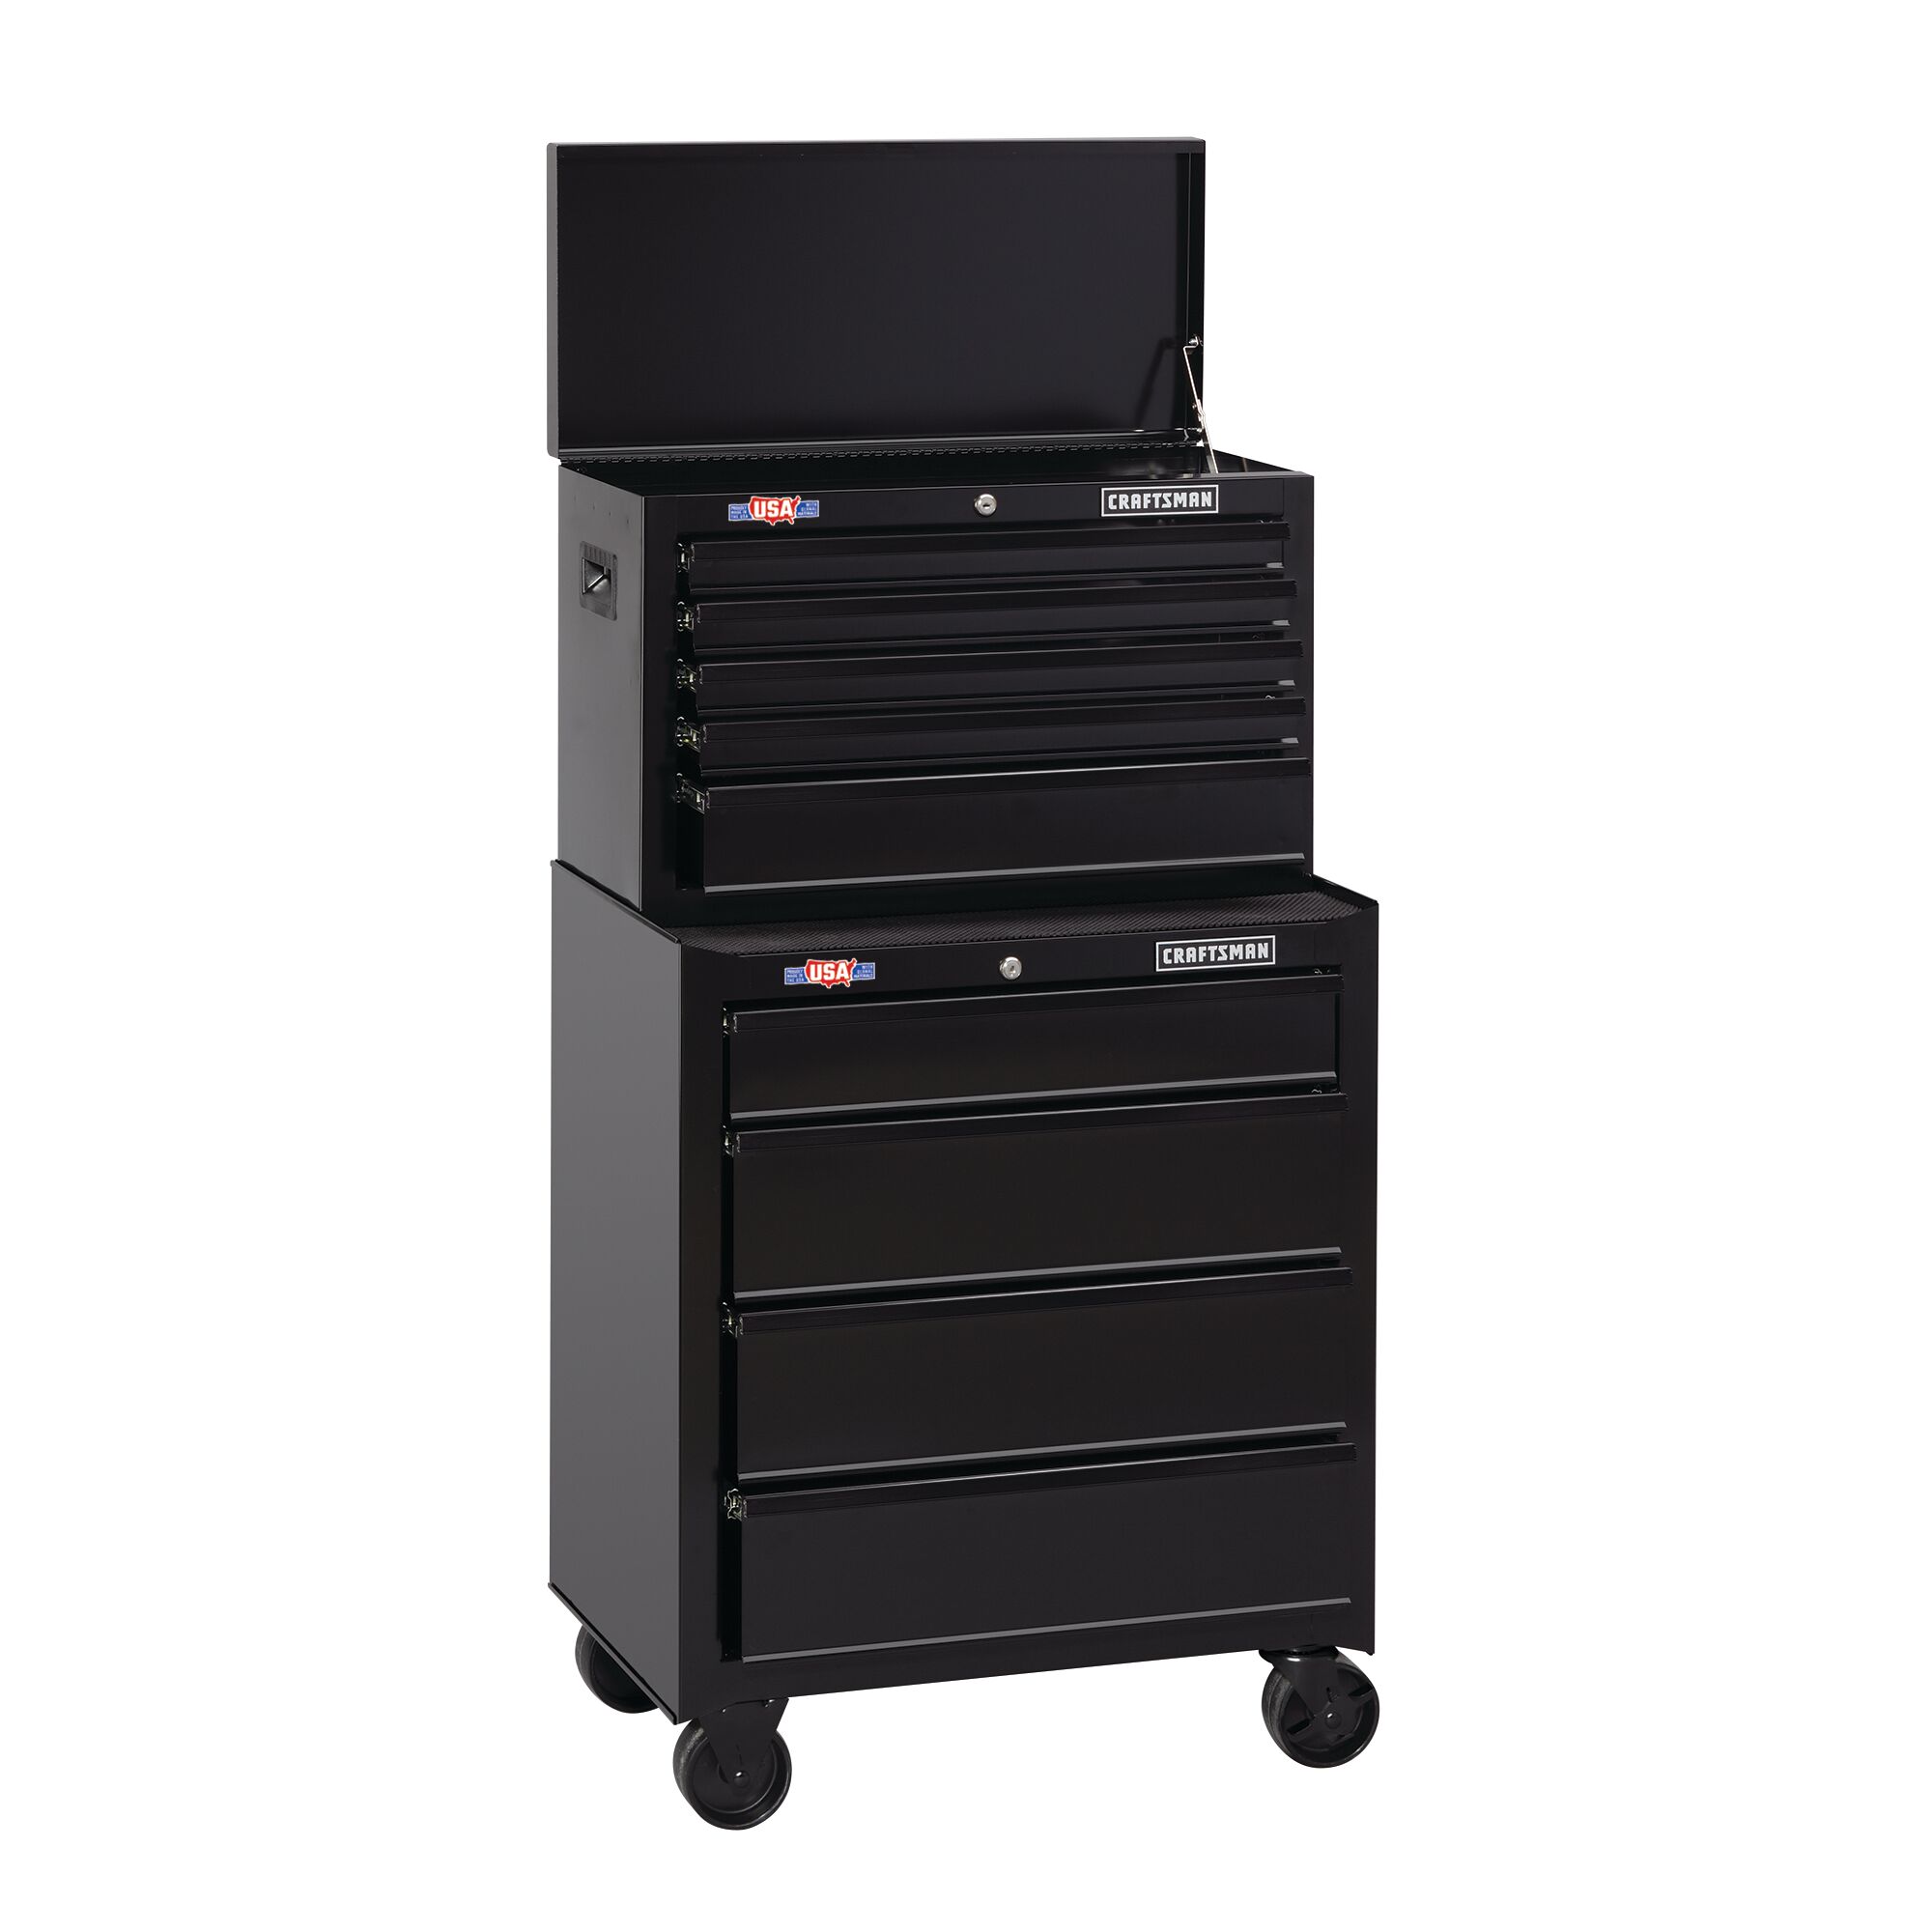 Compatible tool chest / box stacked on top of 1000 Series 27 inch wide 4 drawer rolling tool cabinet.